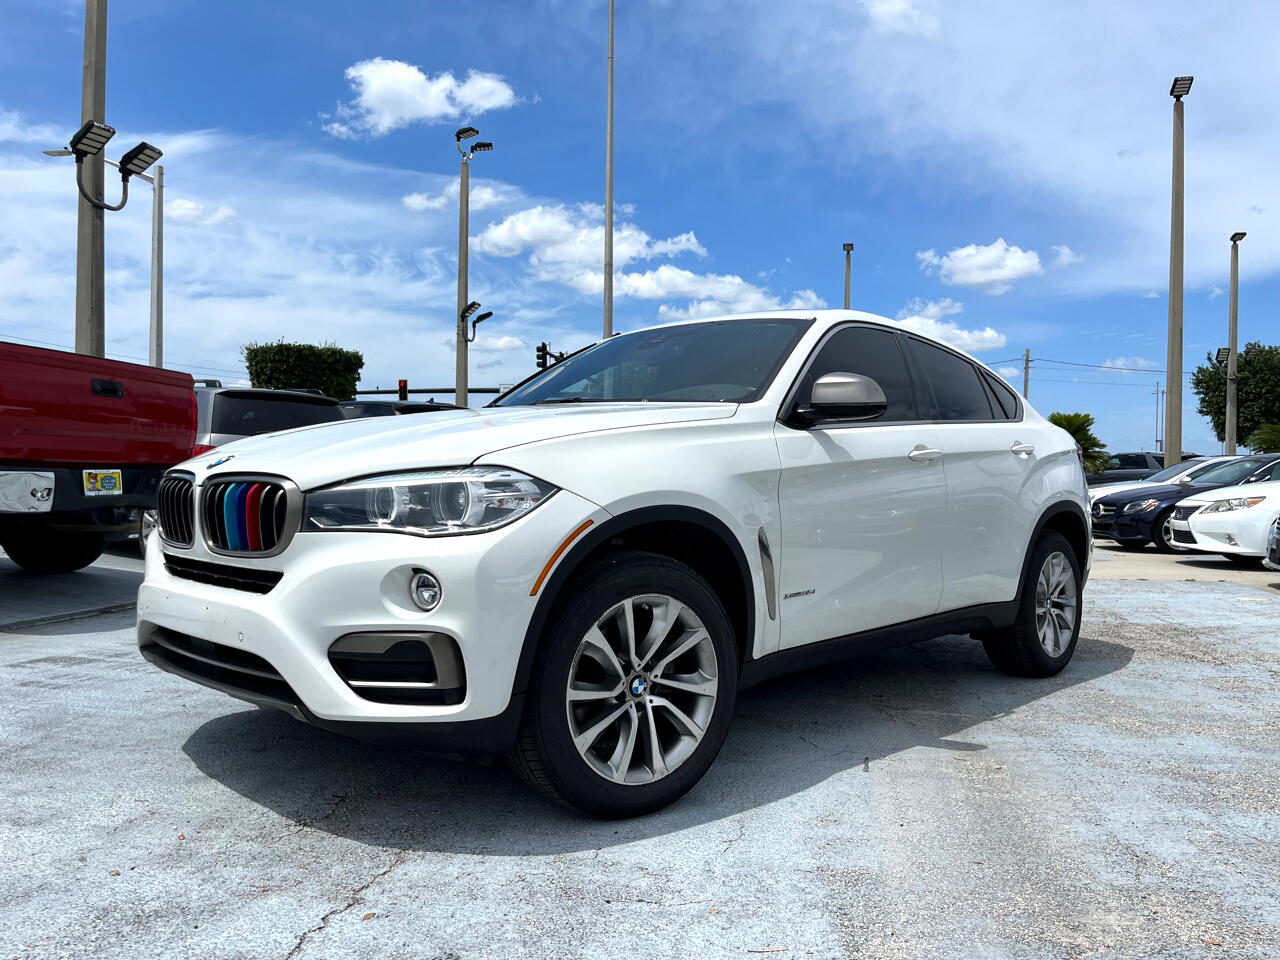 BMW X6 xDrive35i Sports Activity Coupe 2018